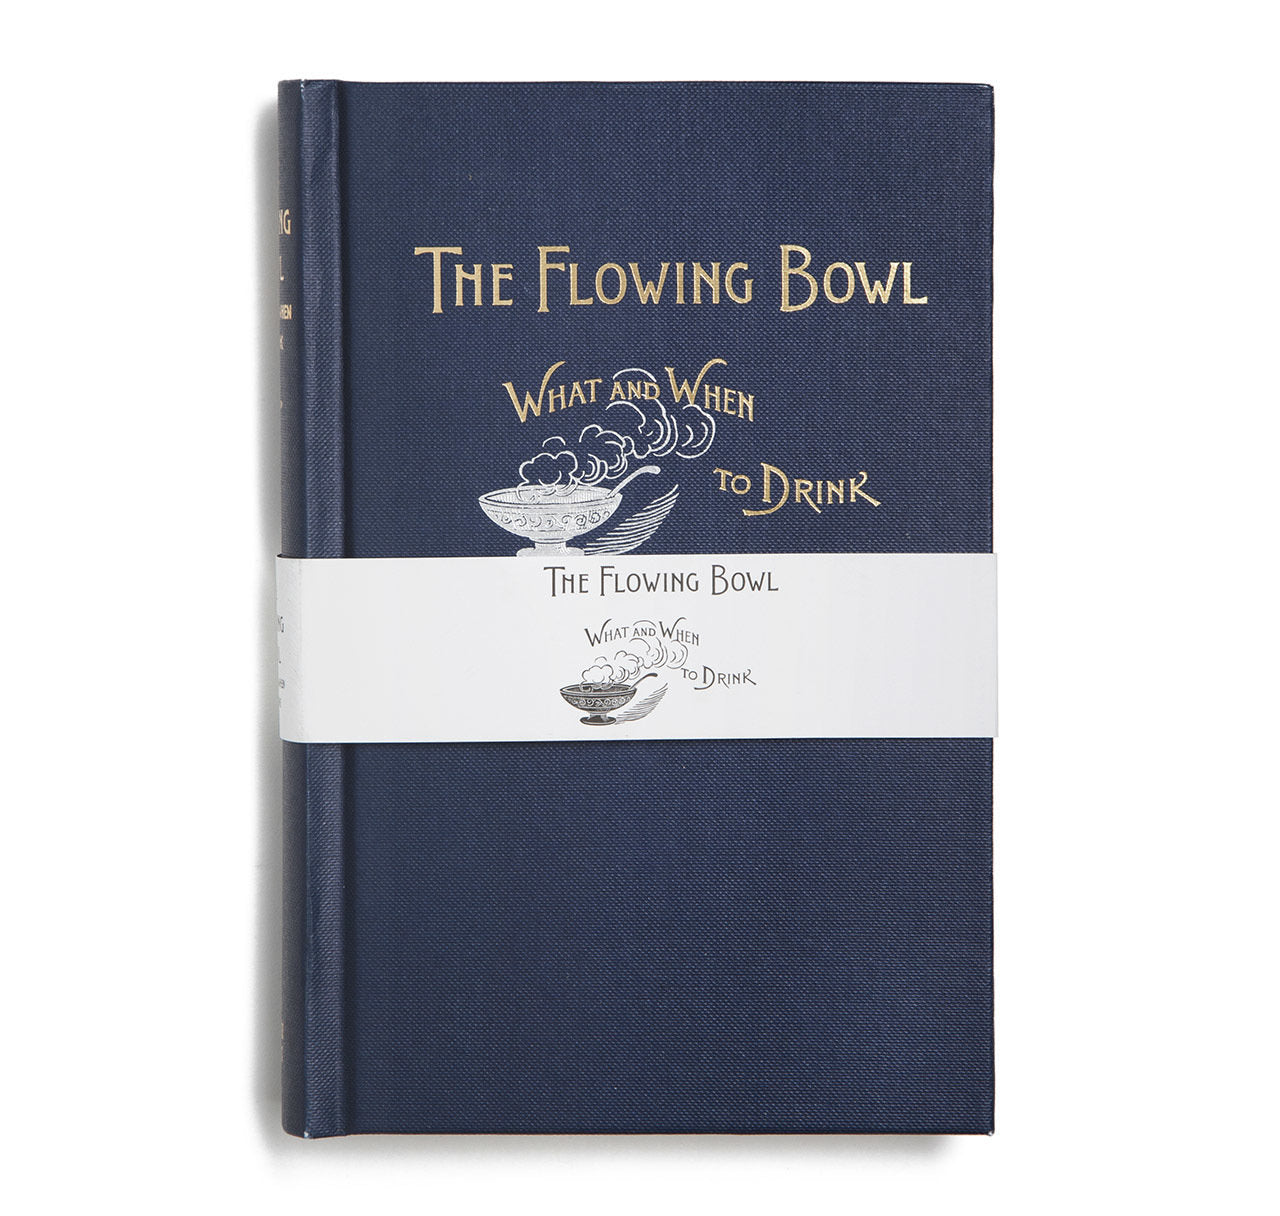 The Flowing Bowl by The Only William